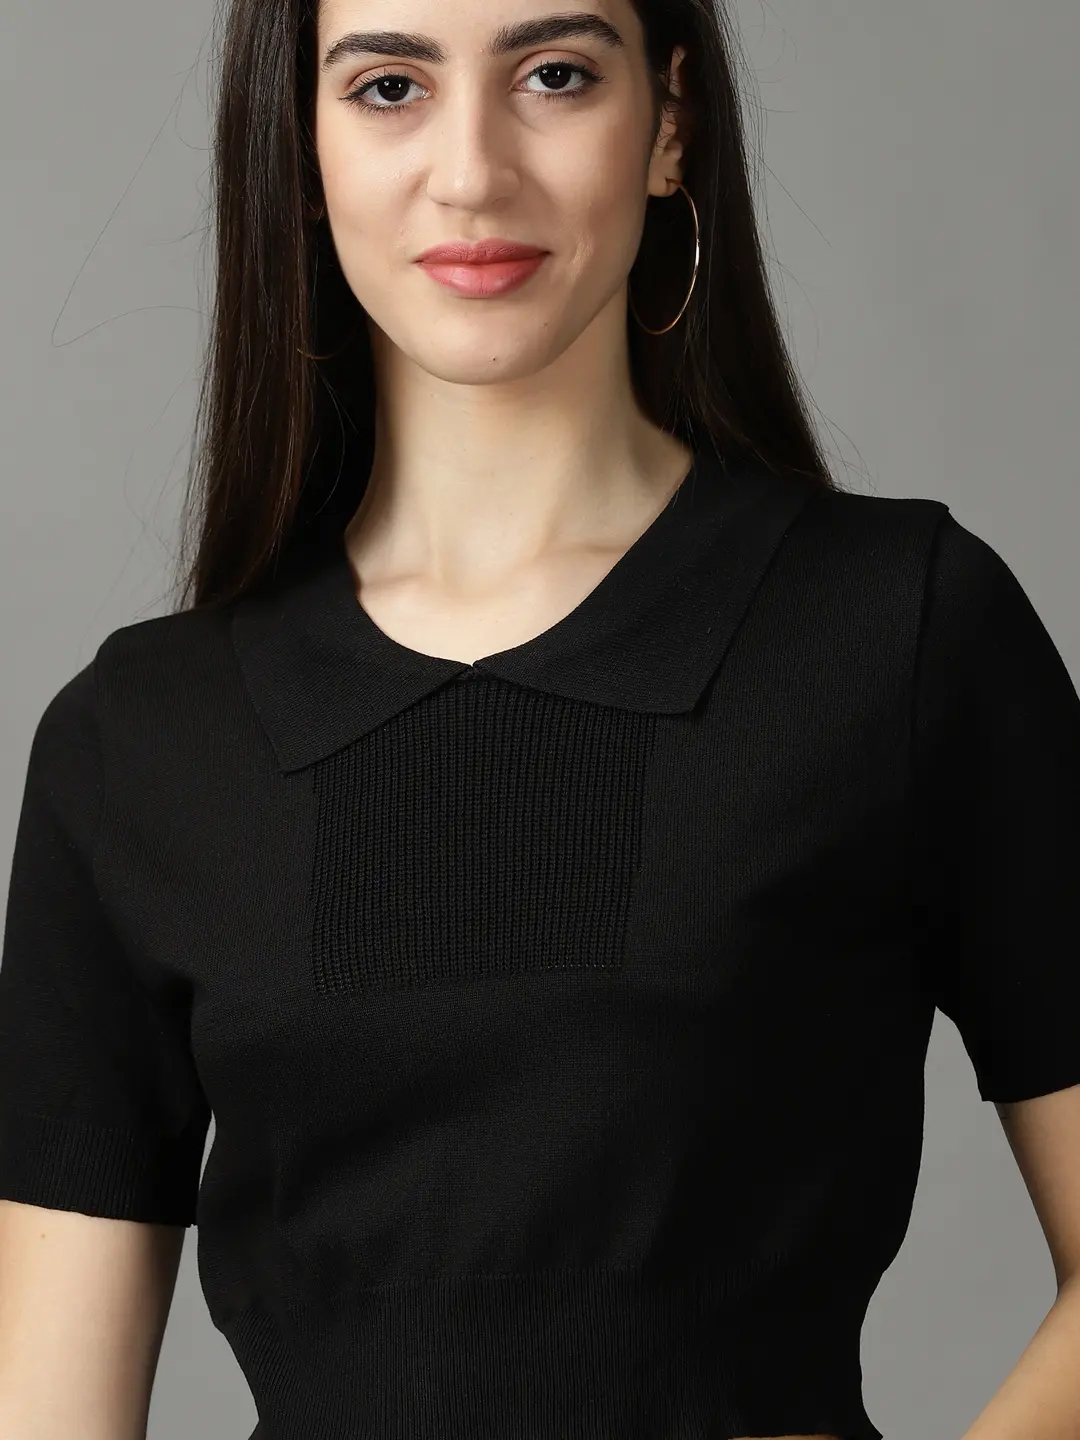 SHOWOFF Women's Shirt Collar Fitted Solid Black Crop Top